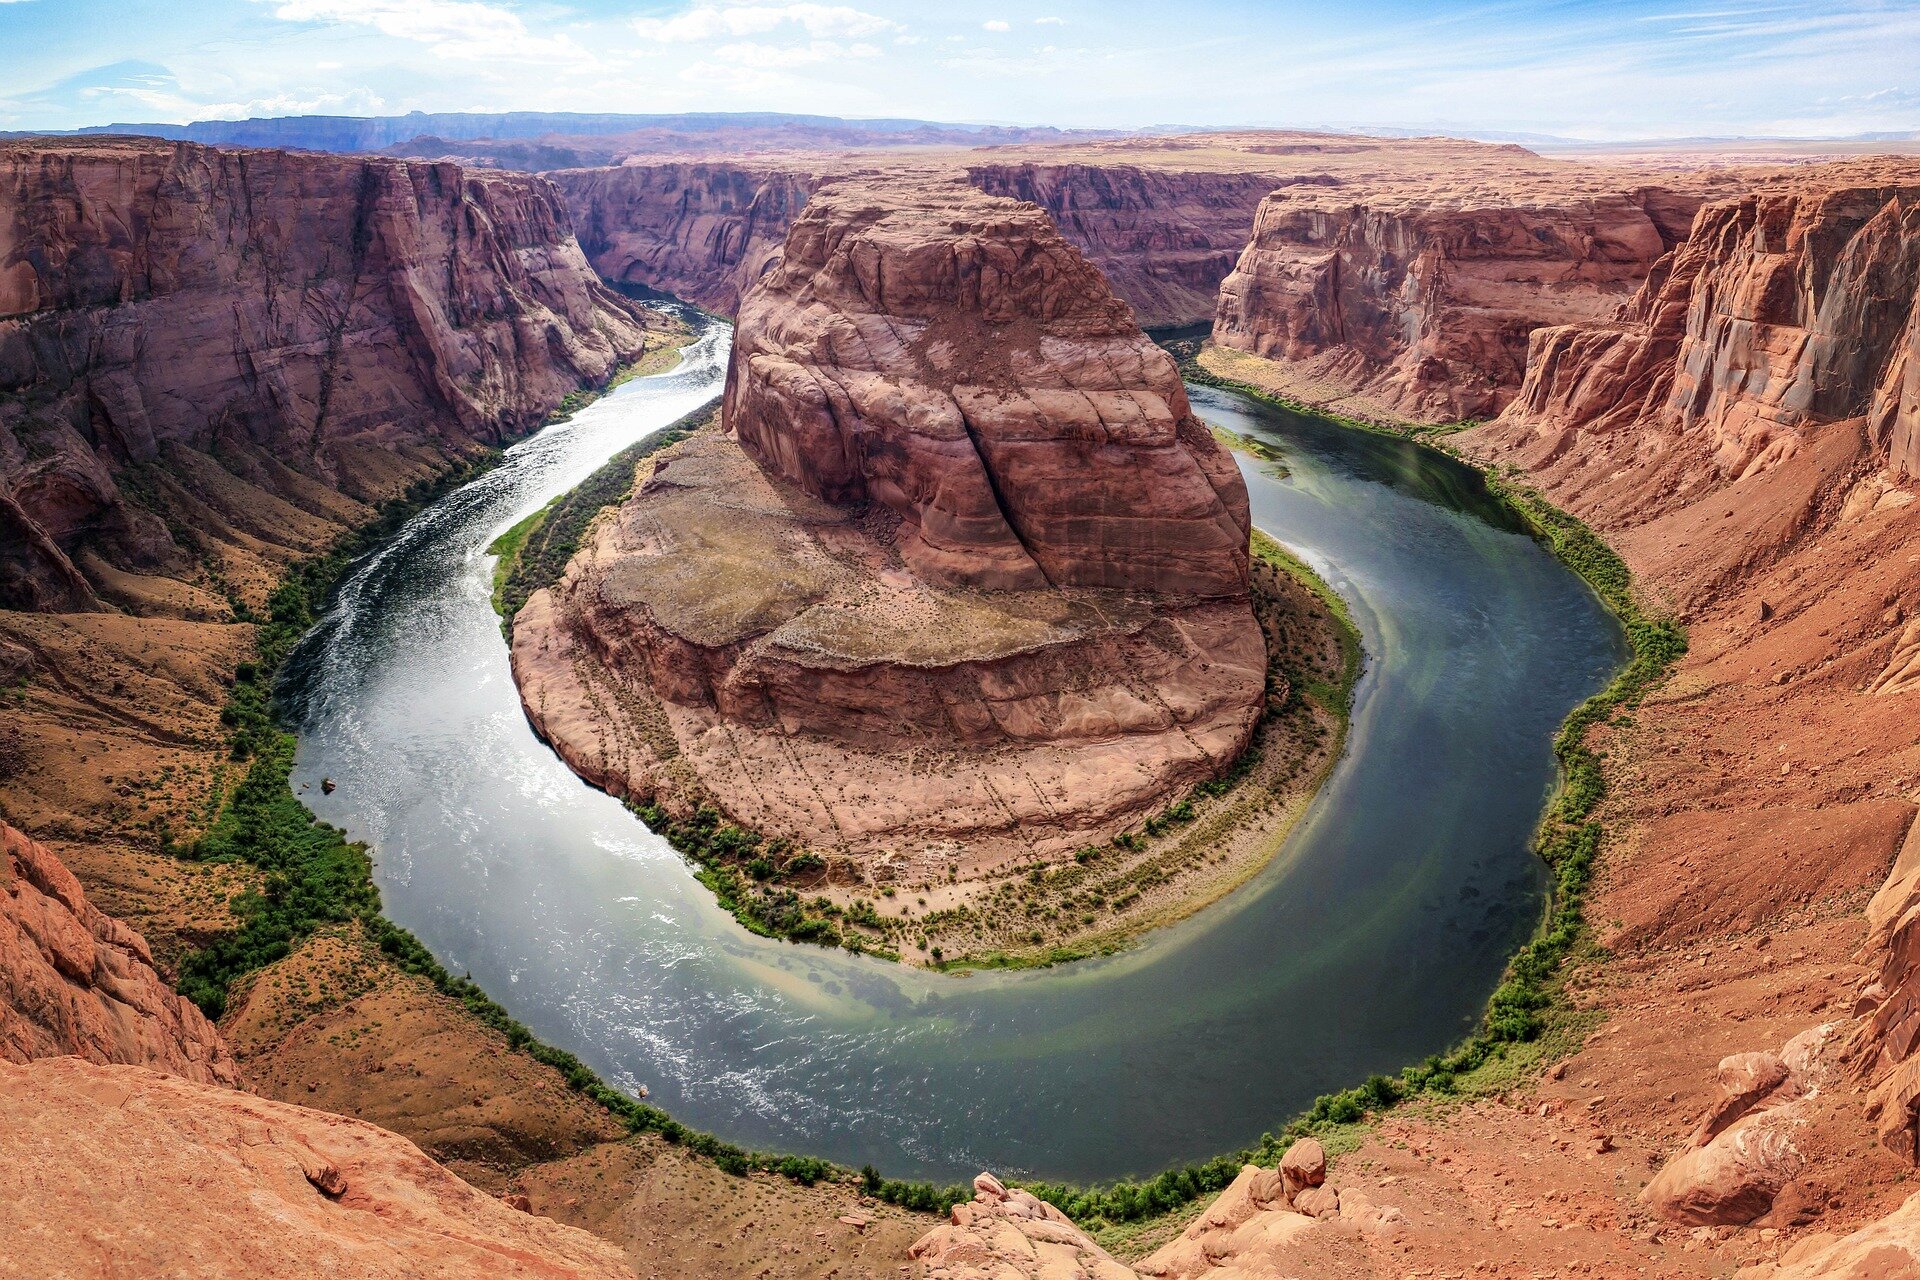 Colorado River Basin ranks among the world’s most water-stressed regions, analysis finds